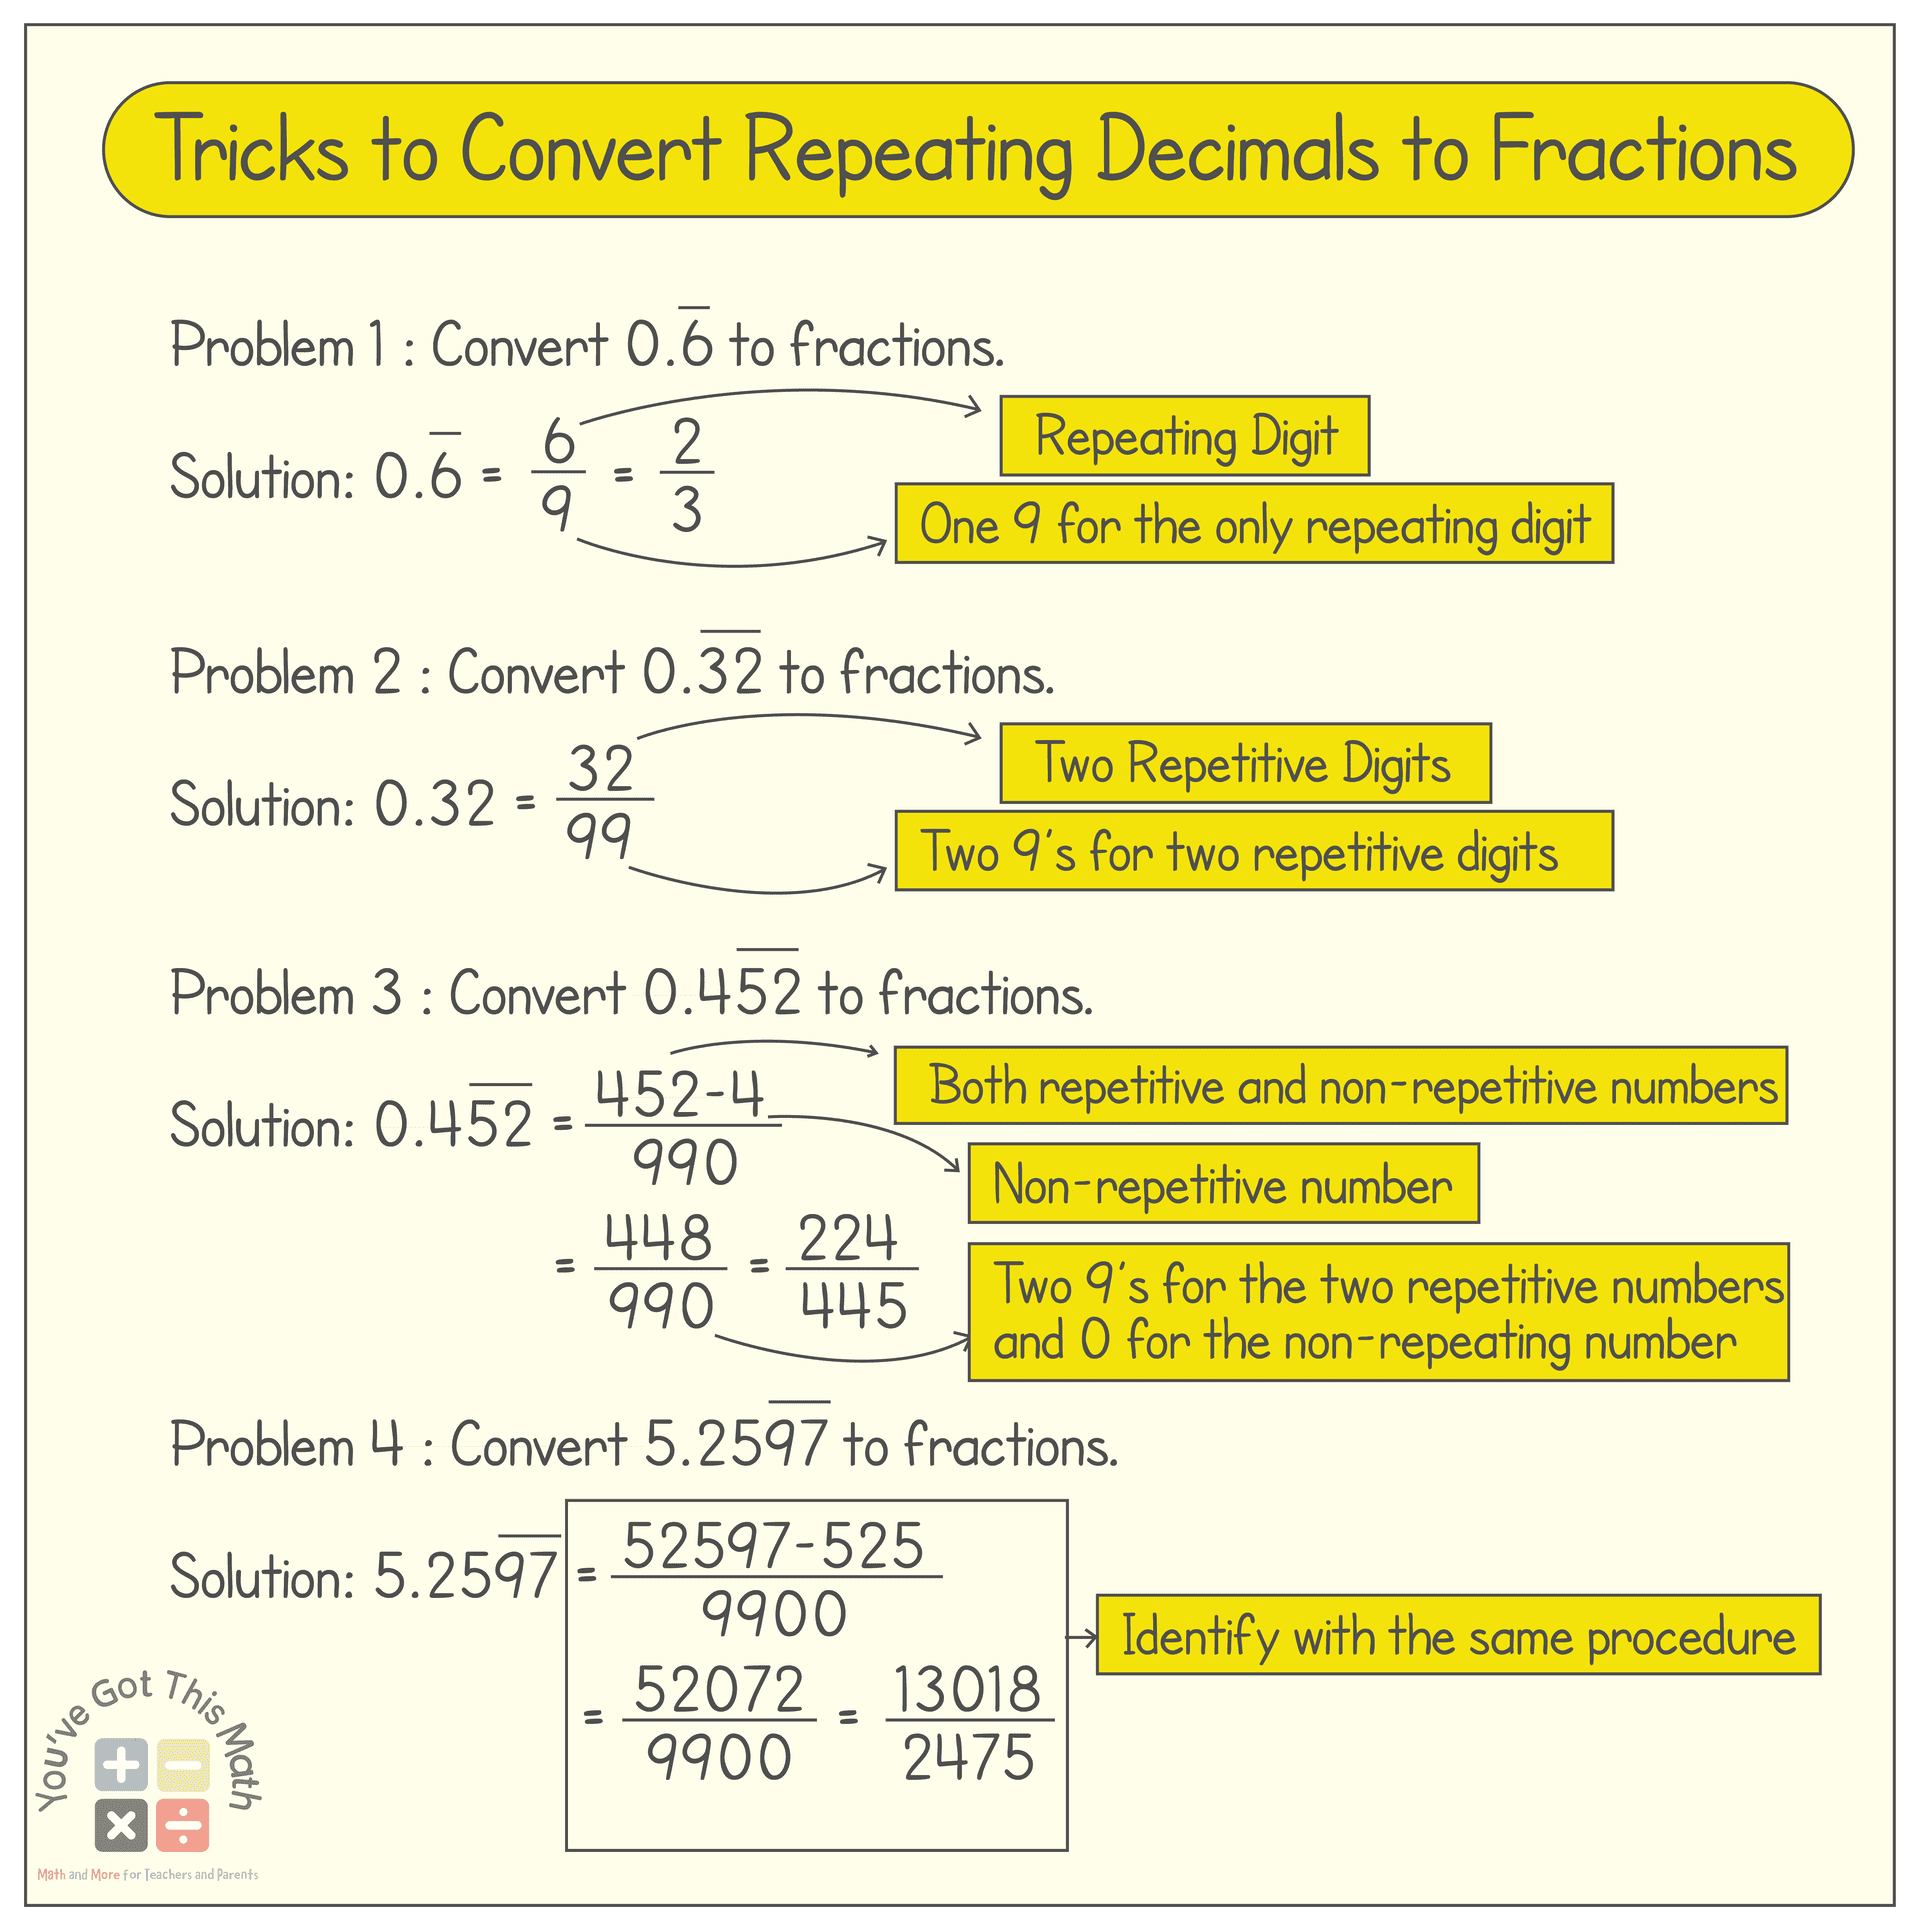 6- Shortcut image to convert decimals to fractions